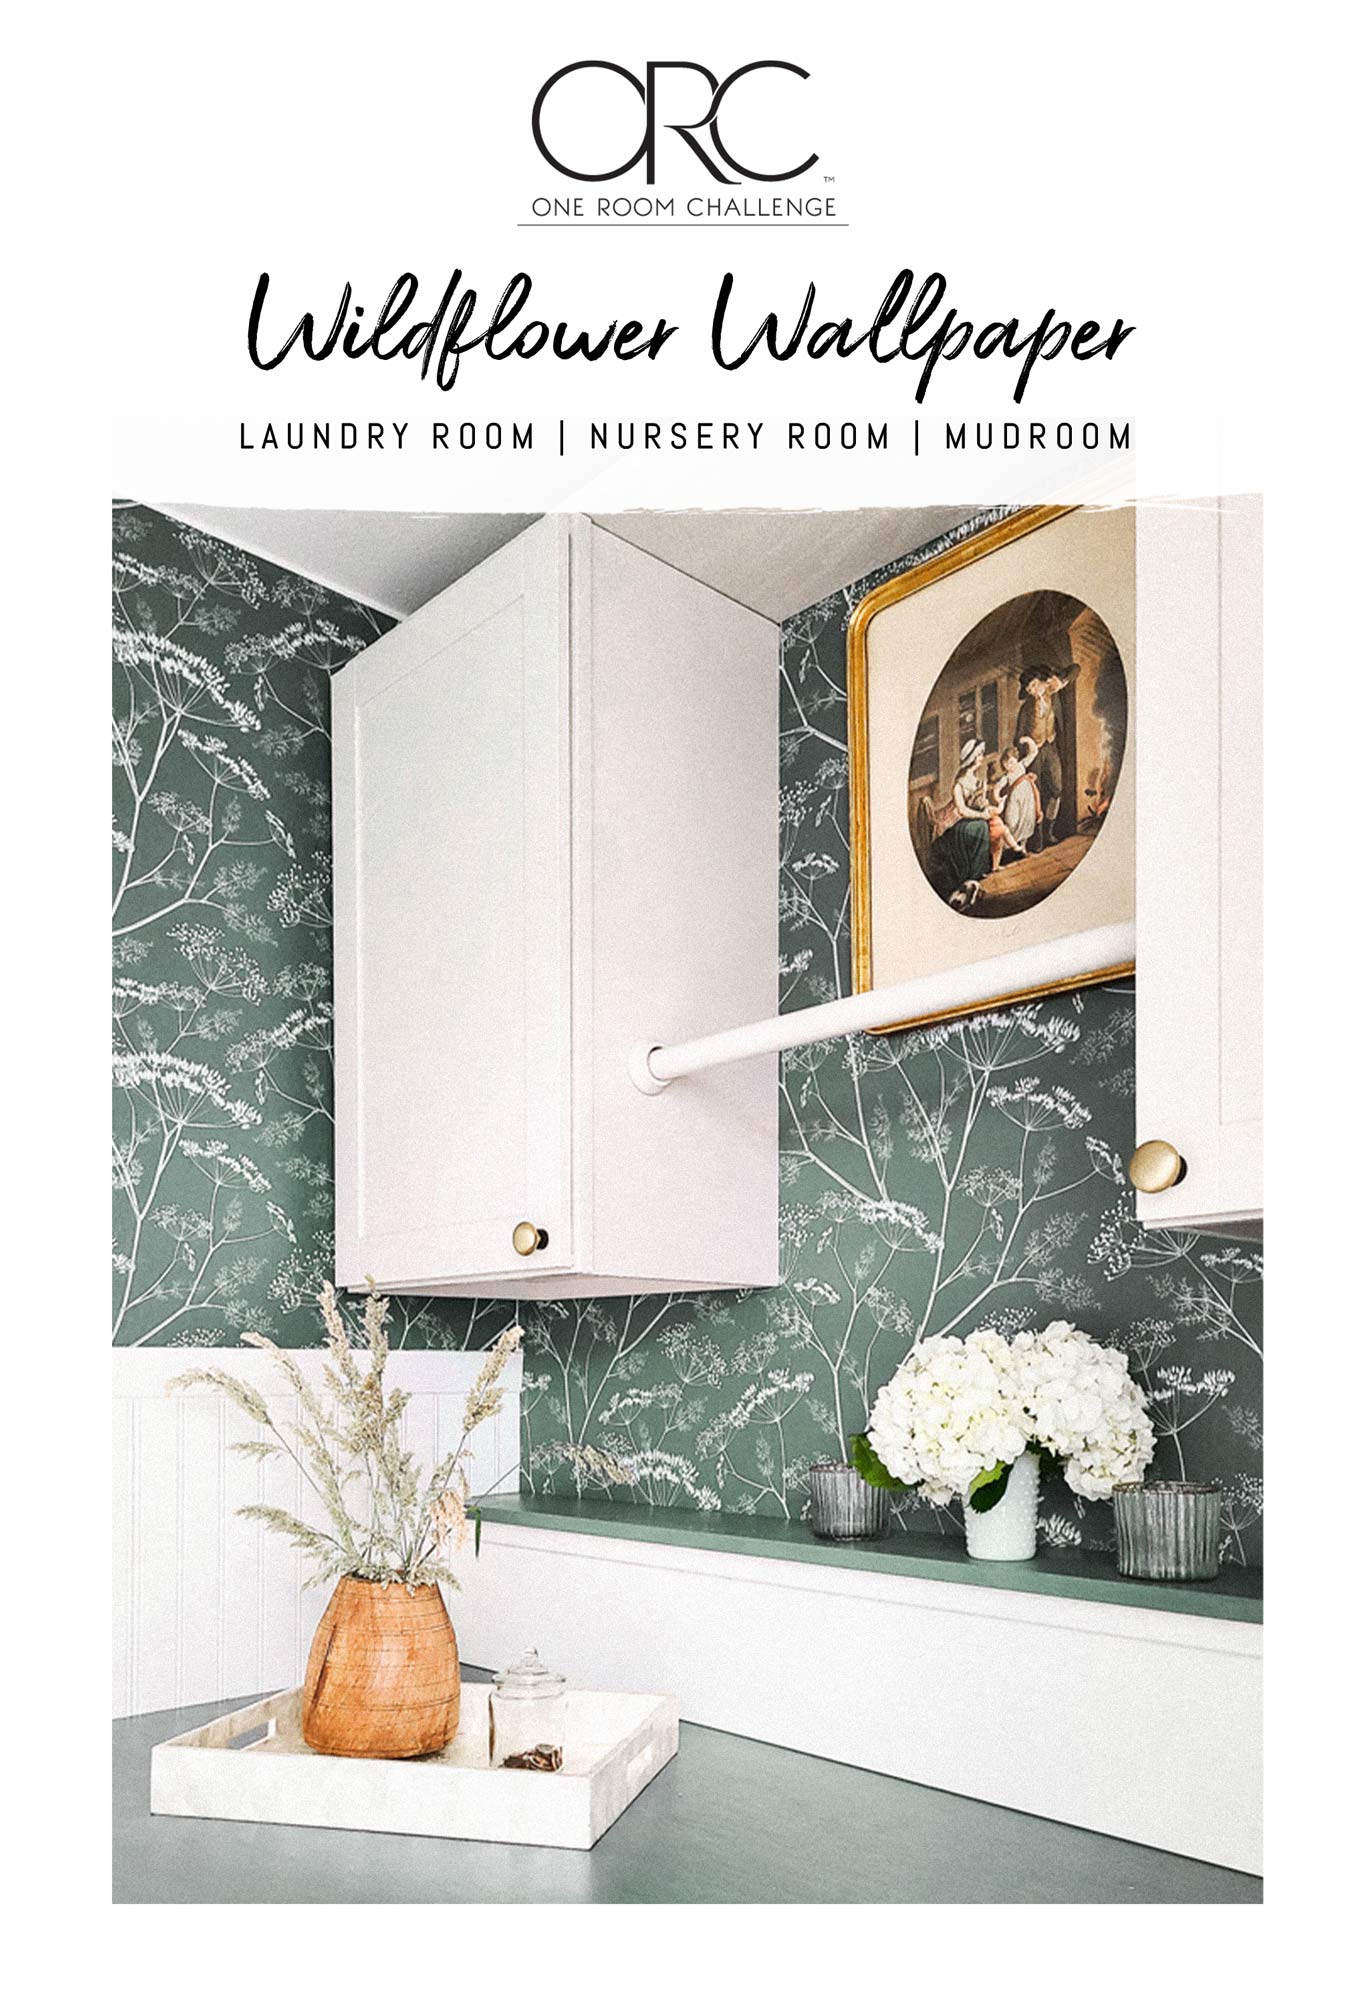 Modern wildflower removable wallpaper styled in nursery interior, mudroom and laundry room